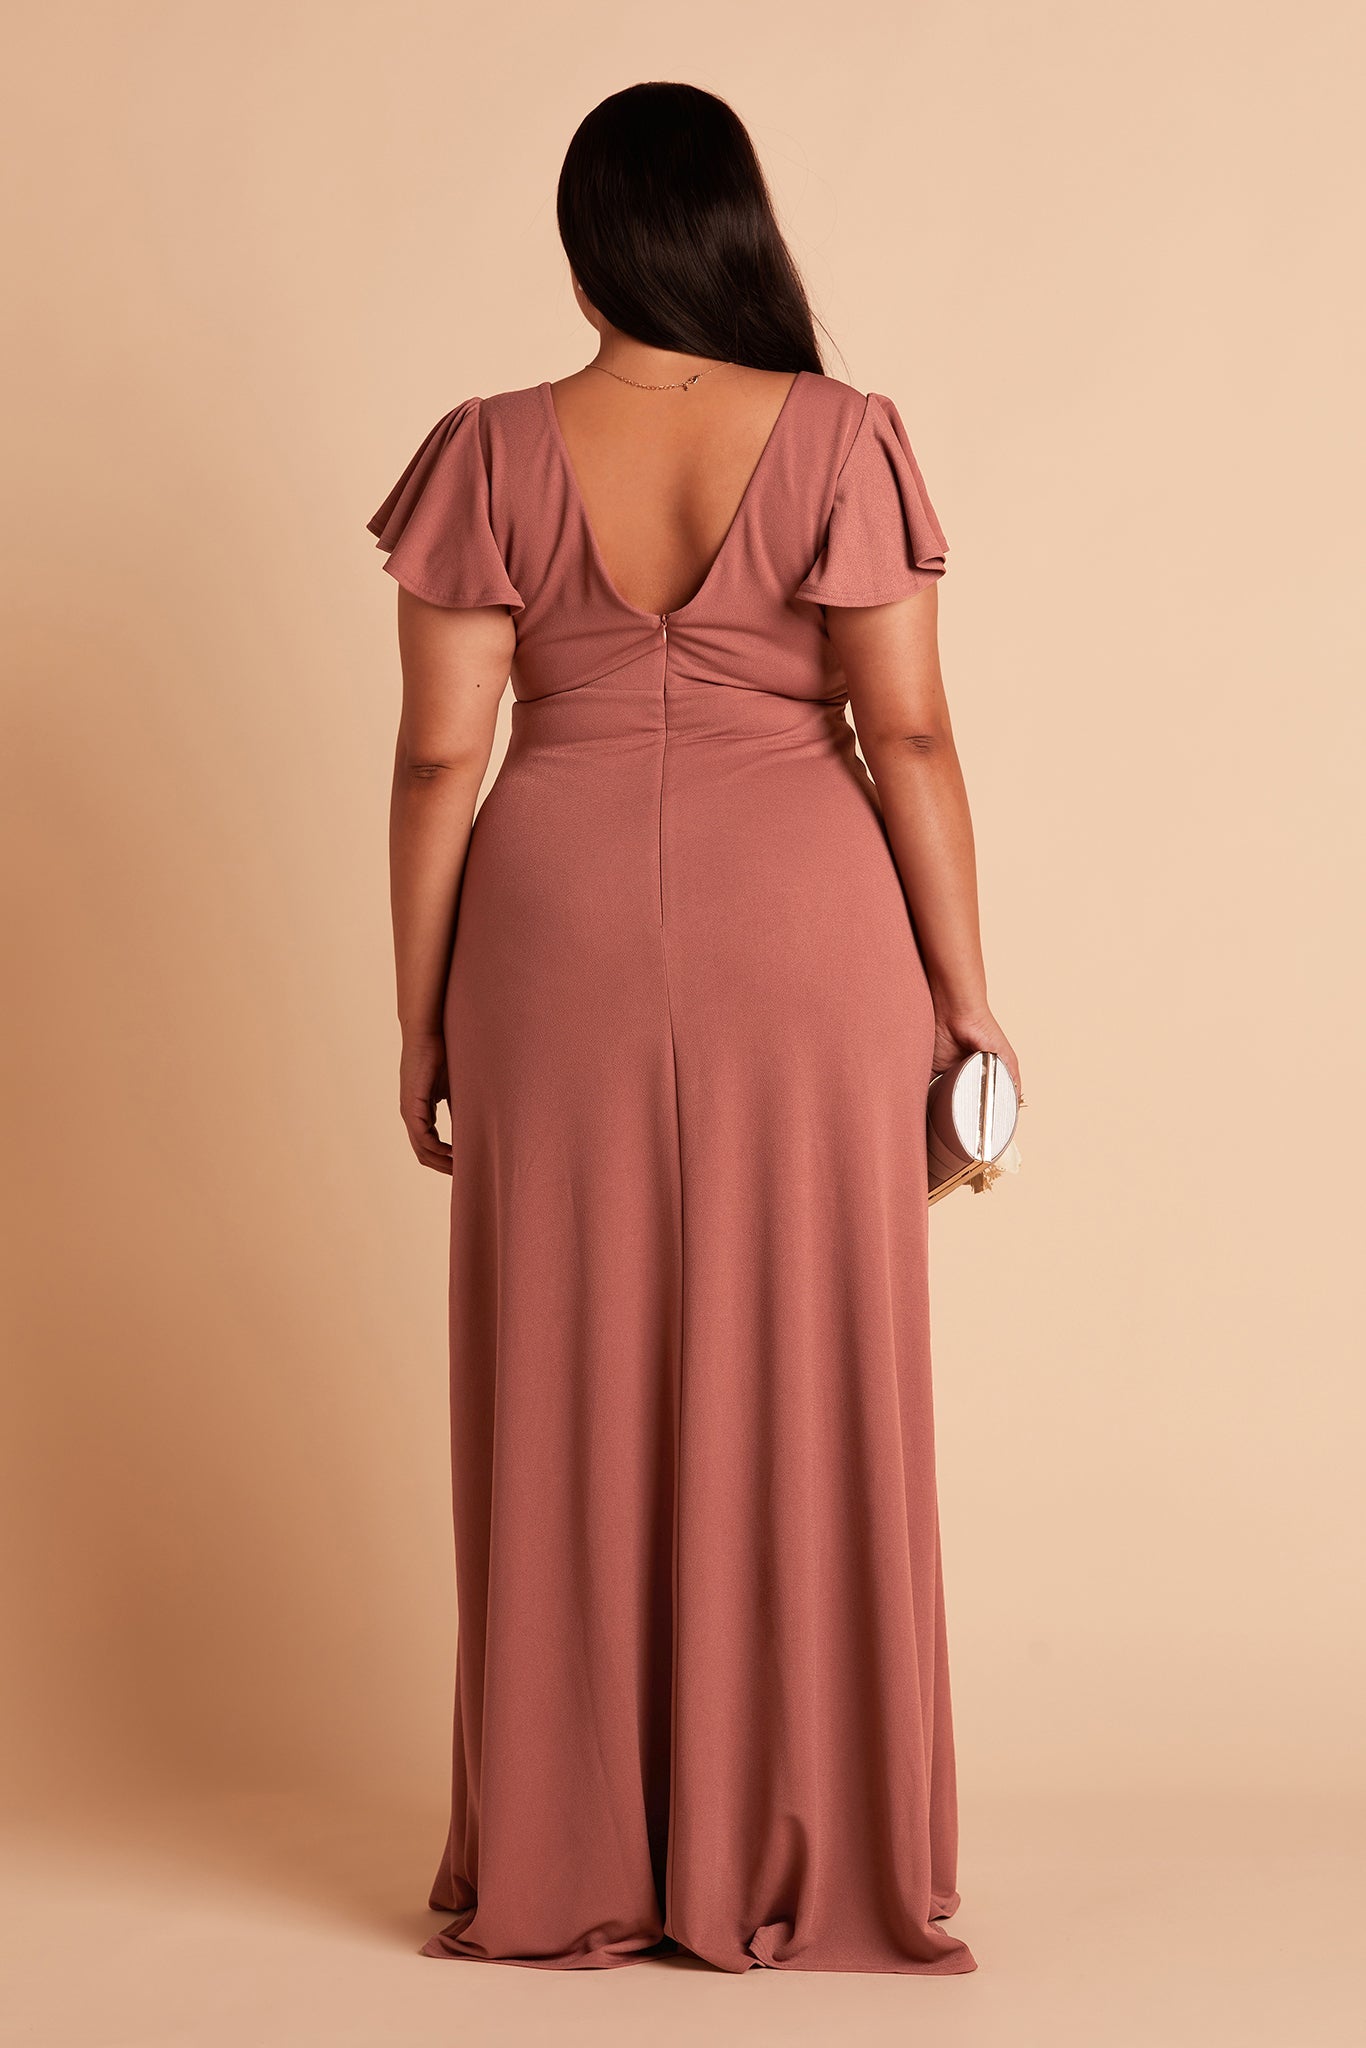 Hannah plus size bridesmaid dress with slit in desert rose crepe by Birdy Grey, back view